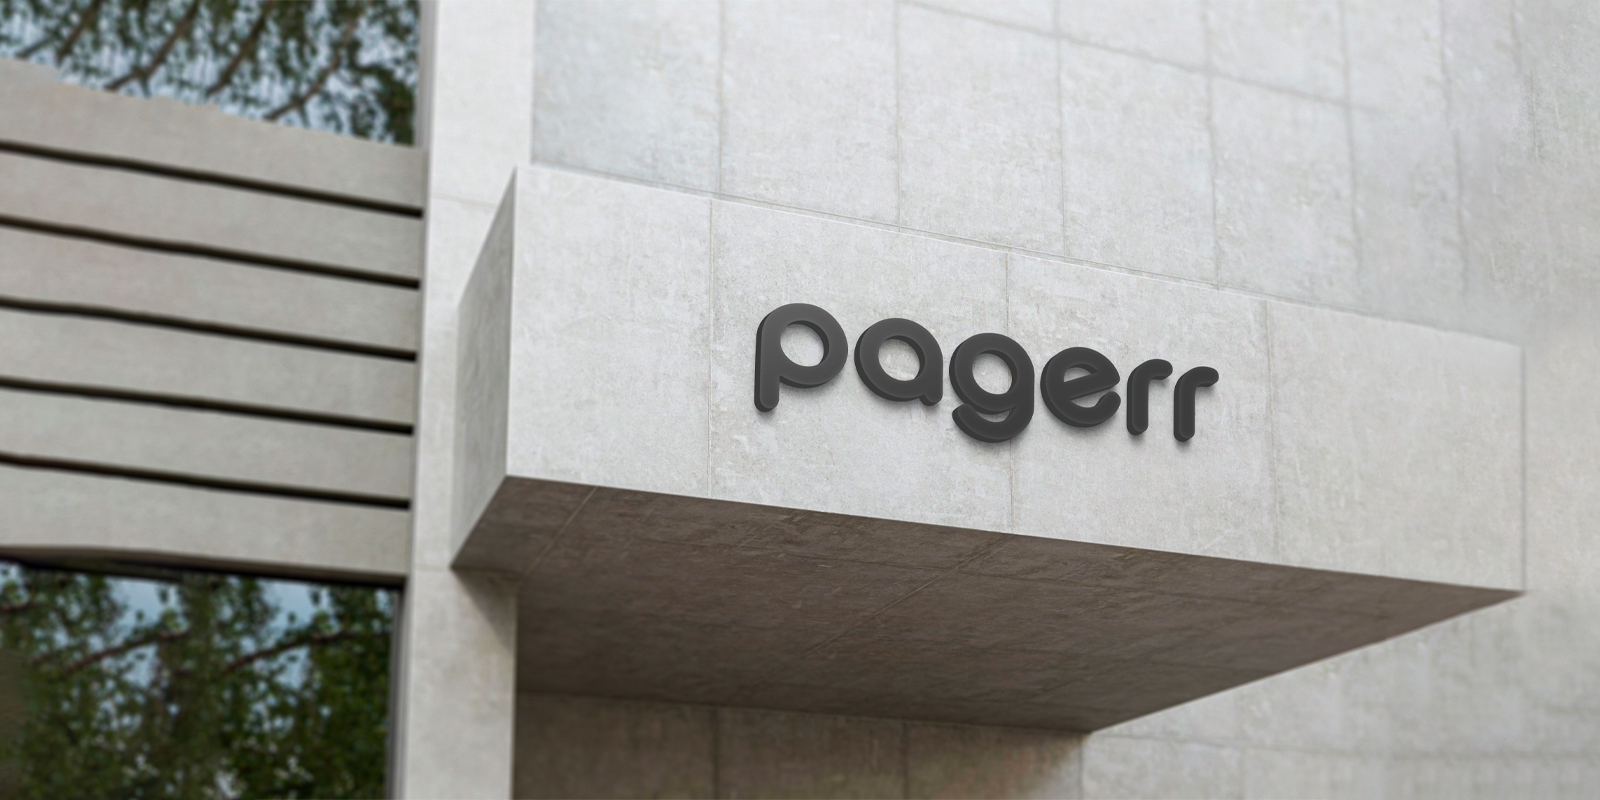 Logo signs in Paris - Print with Pagerr